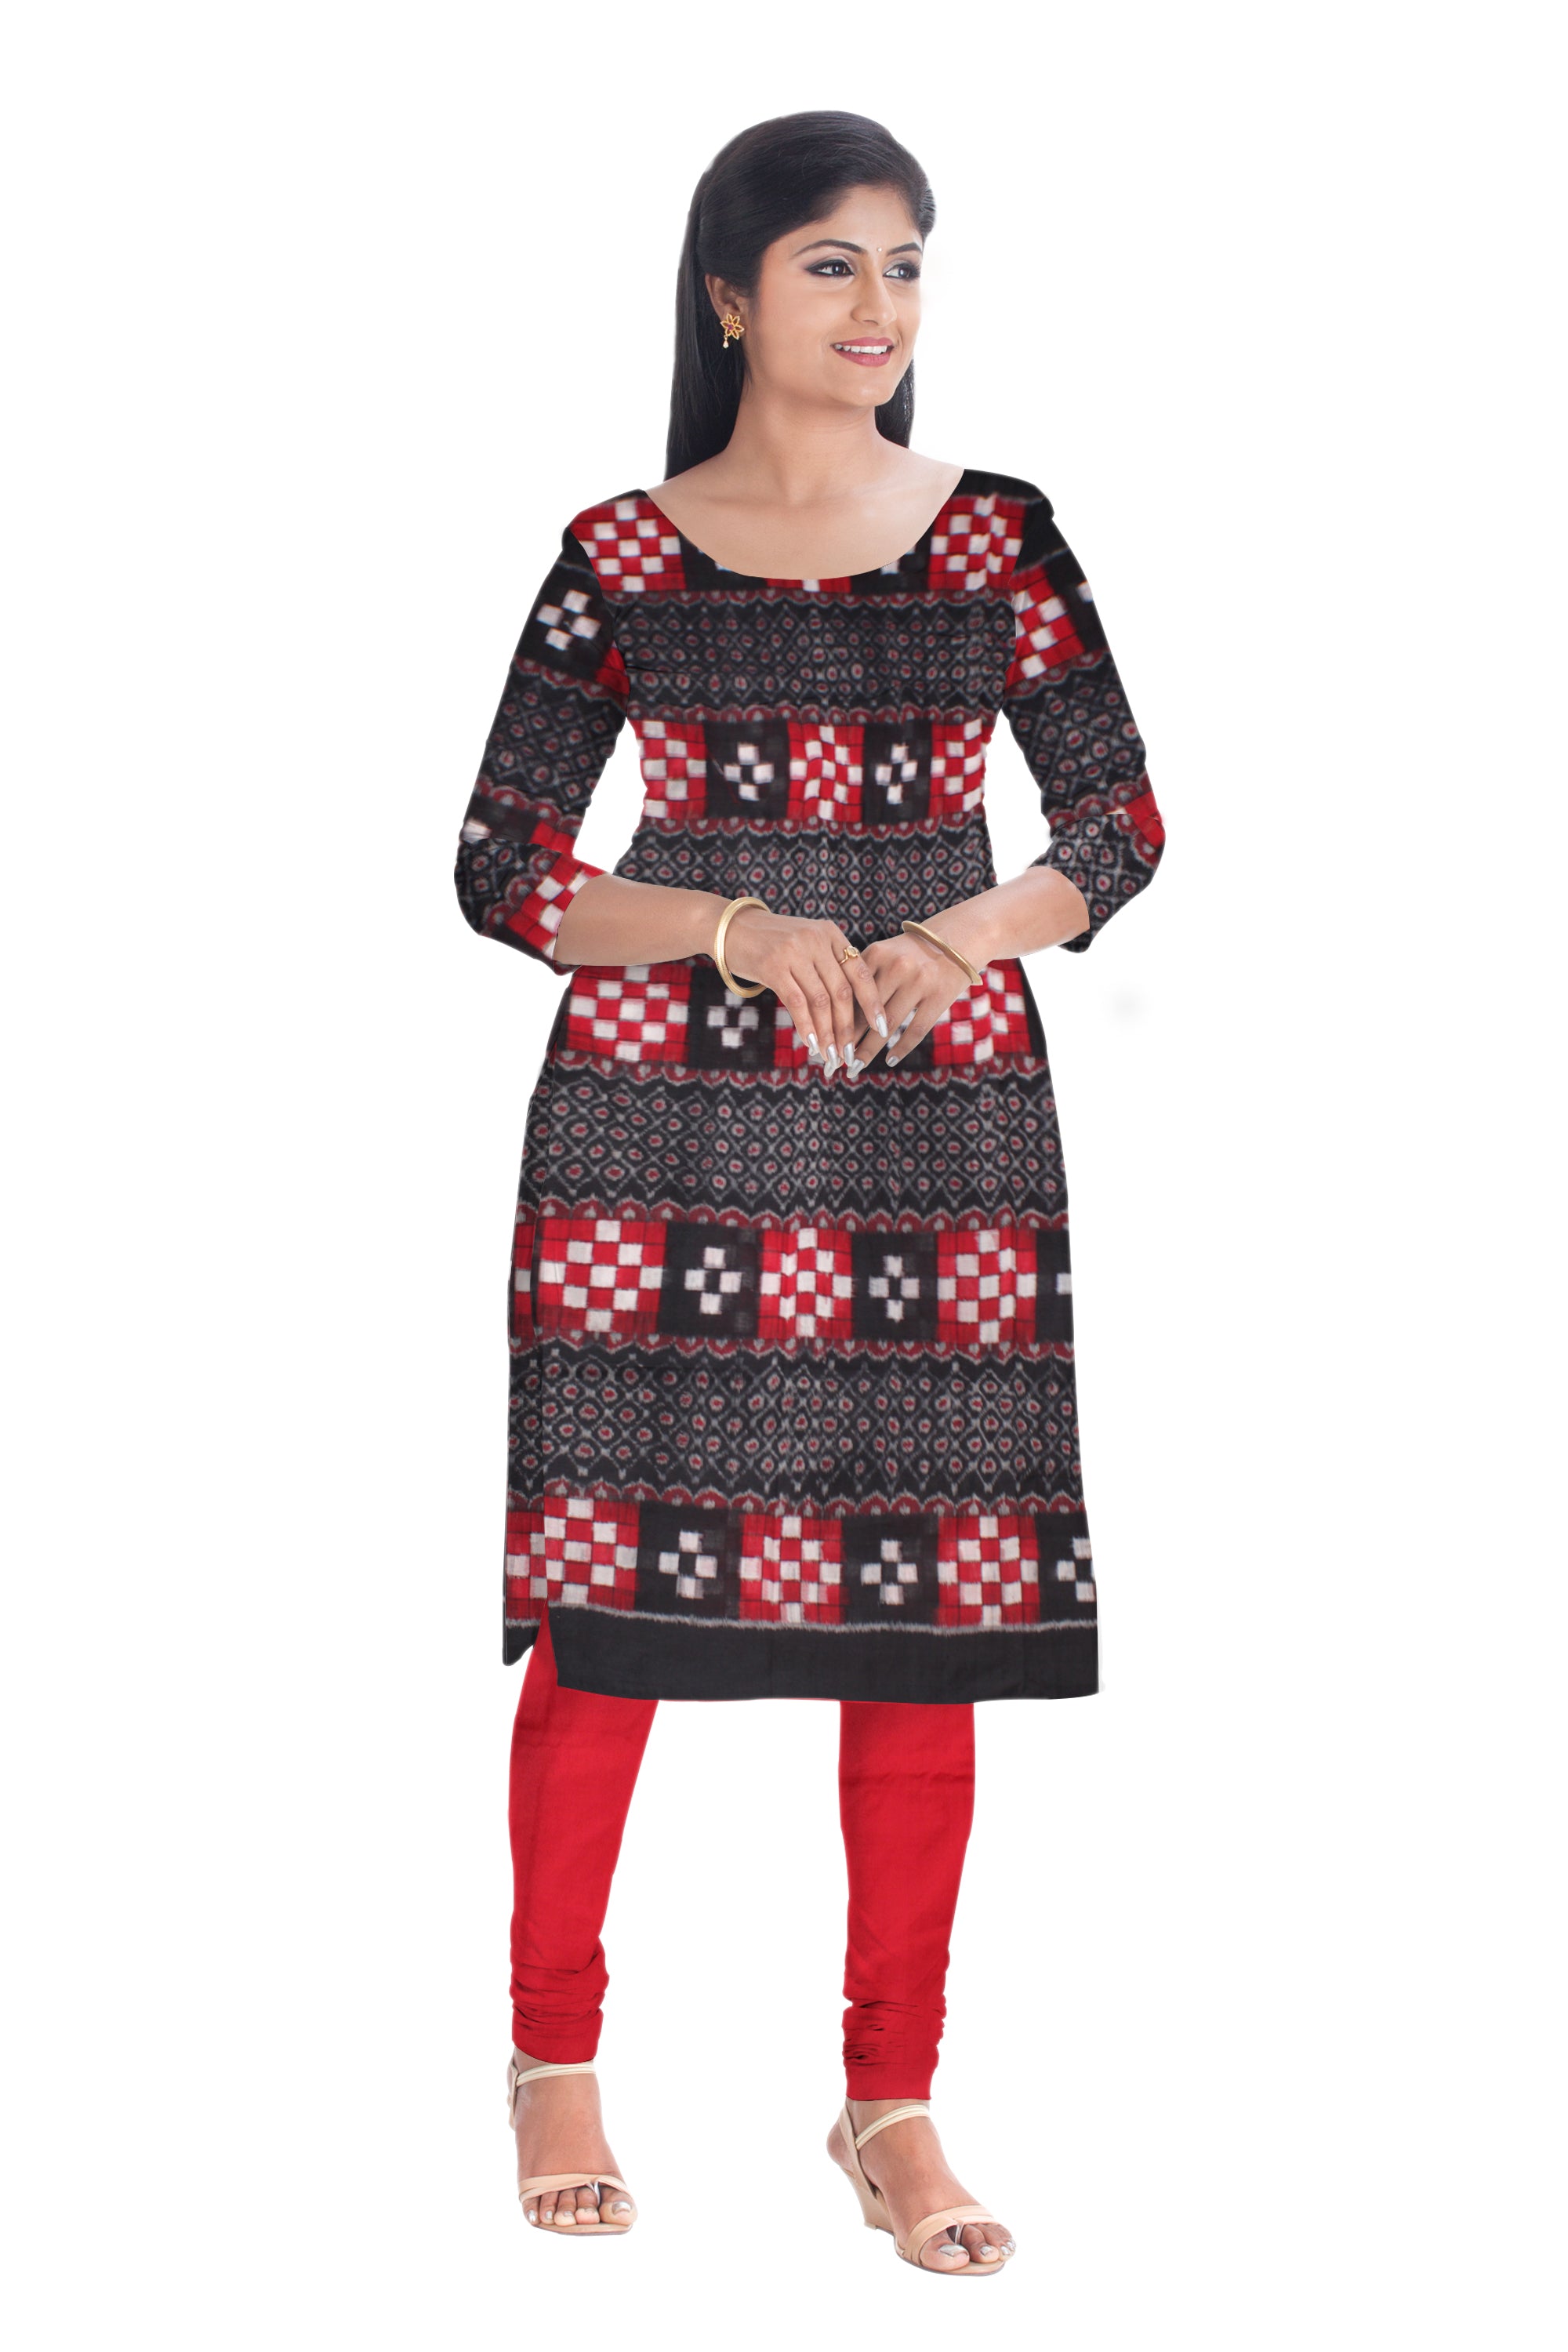 Pasapali design cotton unstitched dress material comes with black and red colour. And Dupatta in red colour  DRESS SET - Koshali Arts & Crafts Enterprise